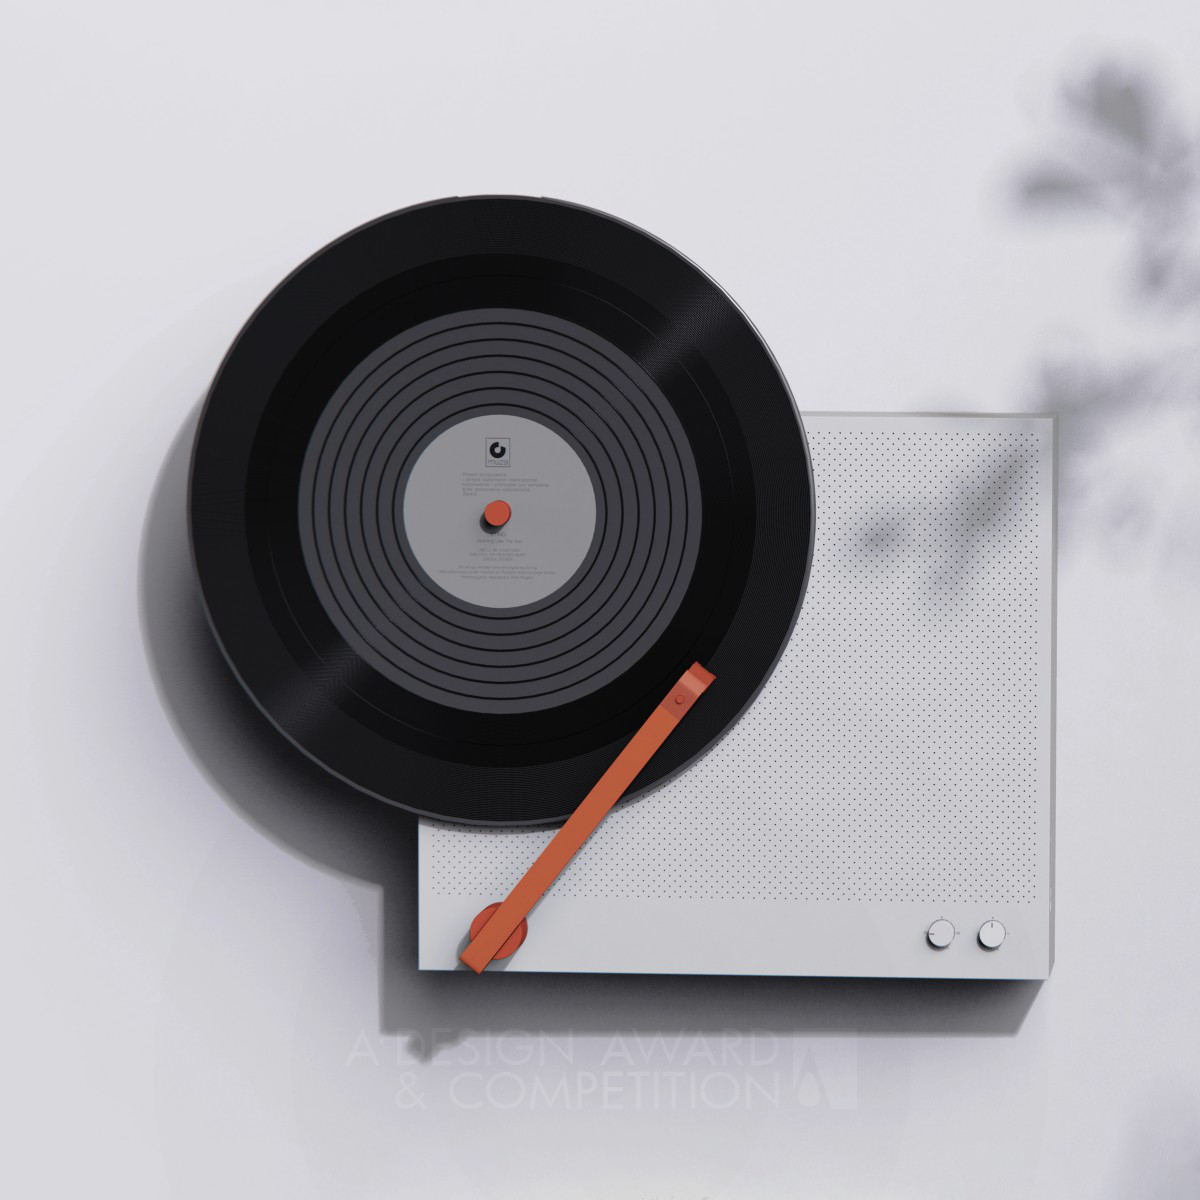 Shr.d Music Player by Bruce Tao